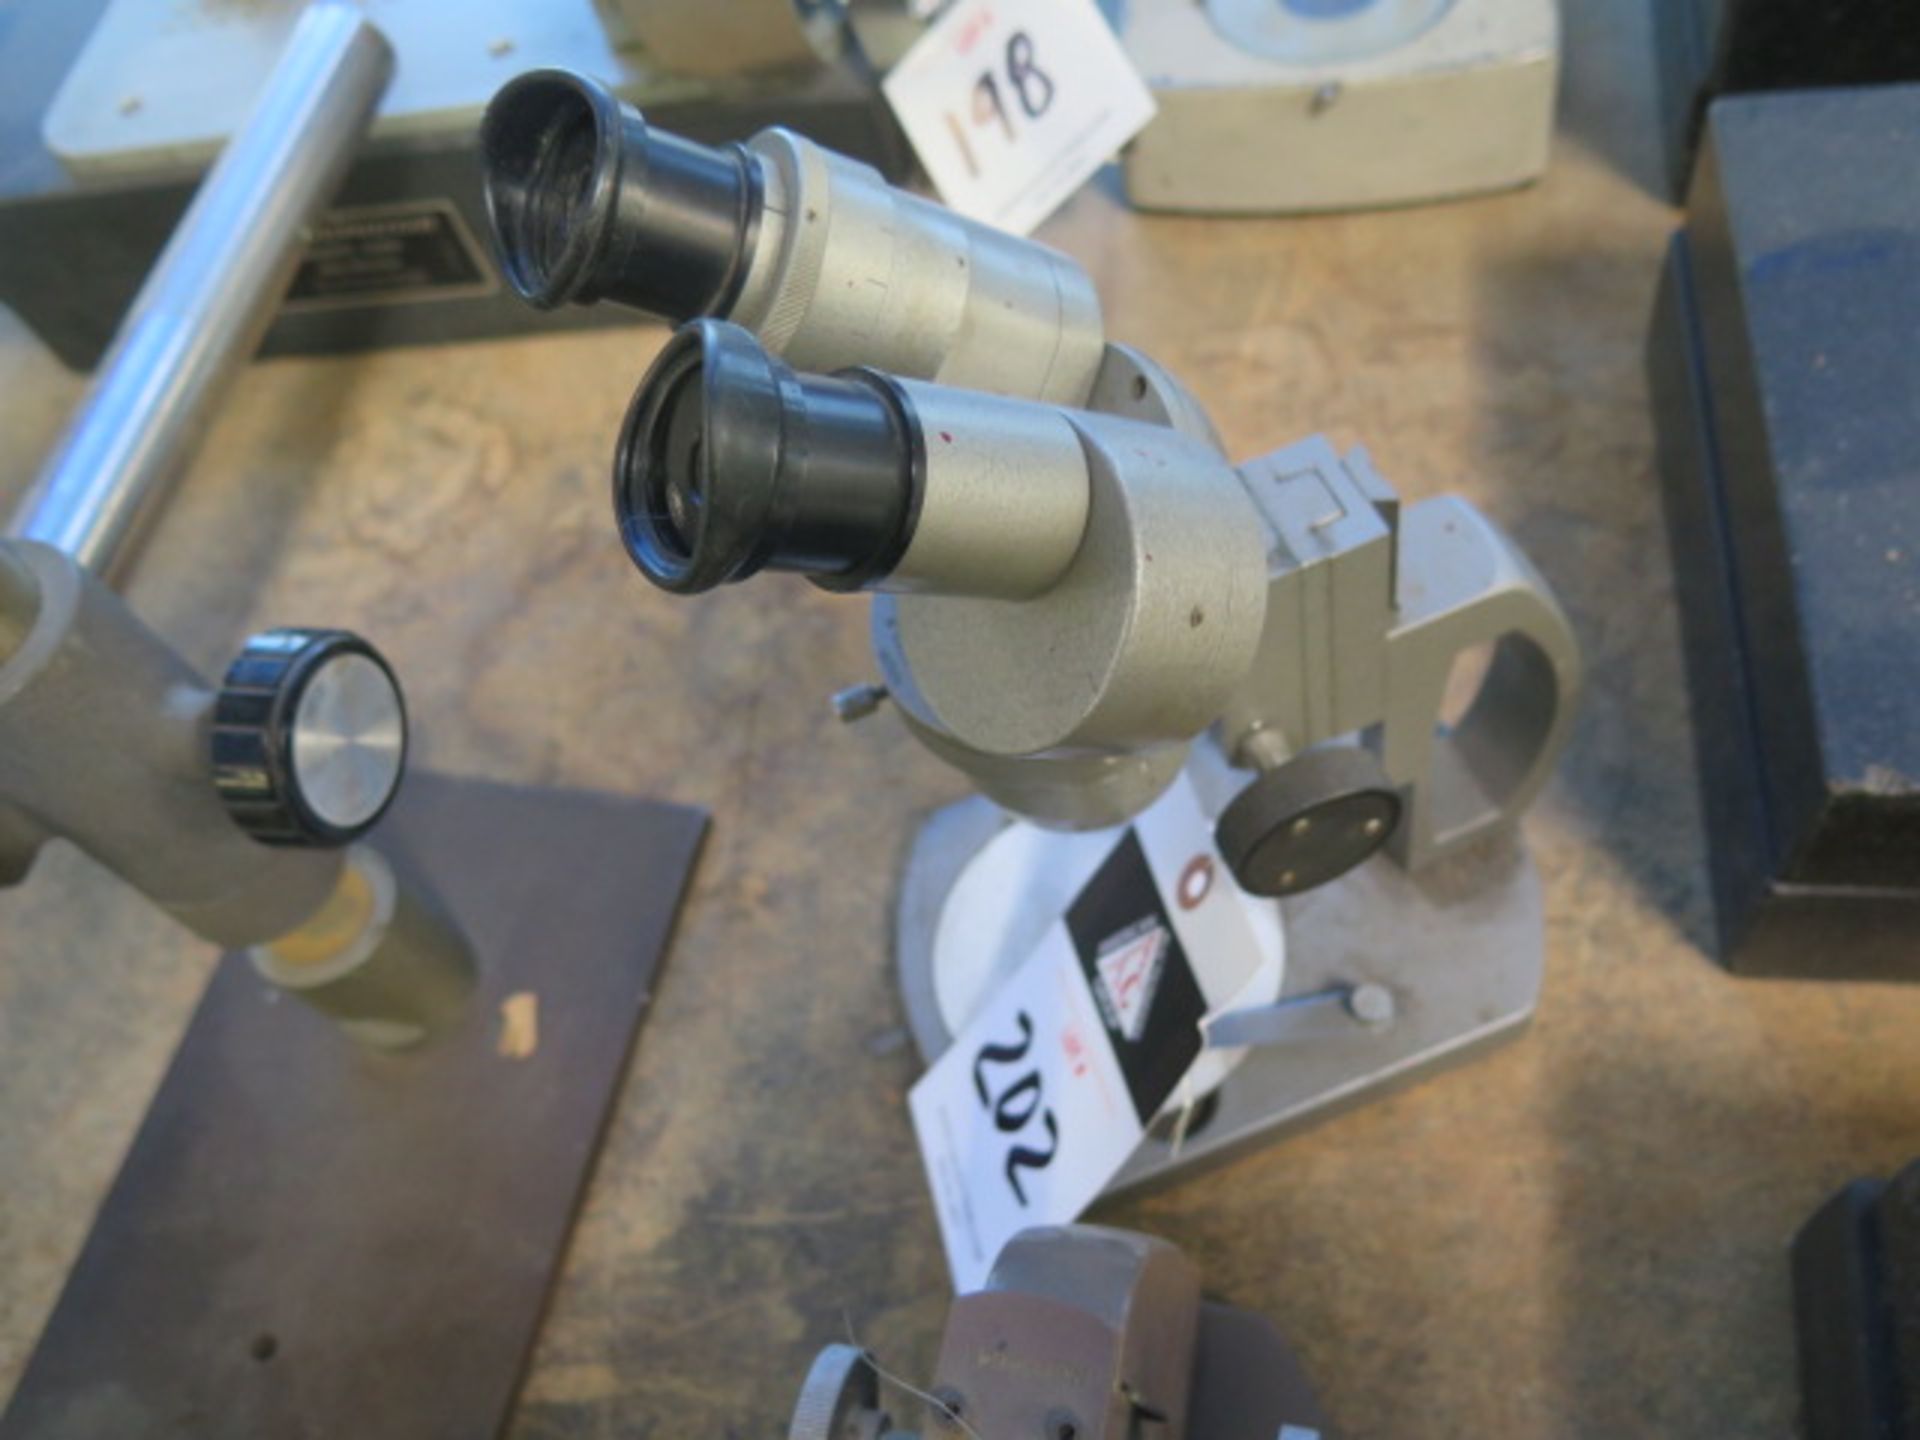 Stereo Microscope (SOLD AS-IS - NO WARRANTY) - Image 2 of 4